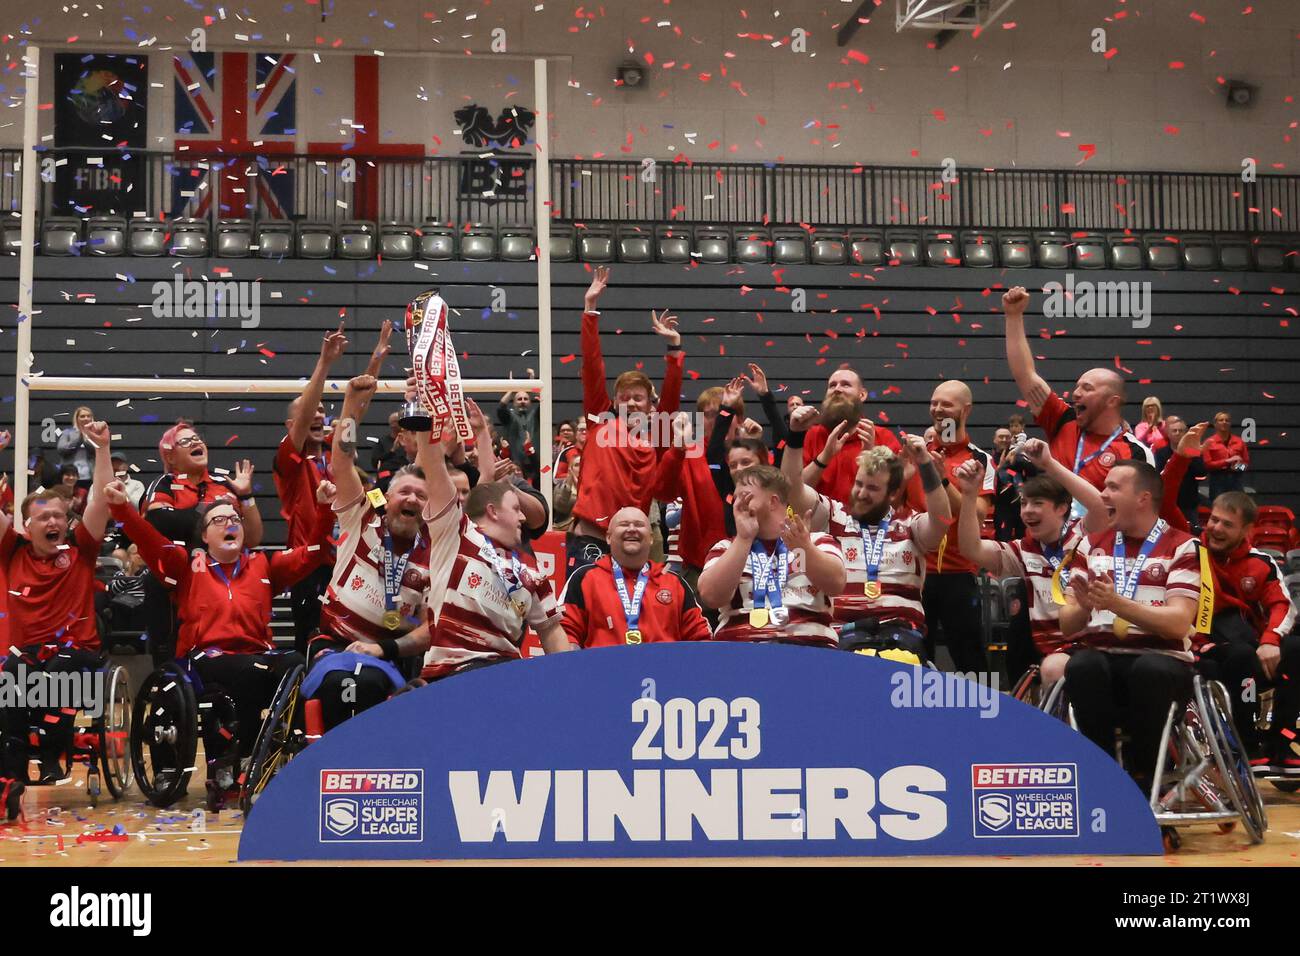 Manchester, UK. 15th Oct, 2023. National Basketball Centre, Belle Vue Arena, Kirkmanshulme Ln, Manchester, 14th October 2023. Betfred Wheelchair Super League Grand Final Leeds Rhinos v Wigan Warriors Wigan celebrate with the Wheelchair Super League trophy. Credit: Touchlinepics/Alamy Live News Stock Photo